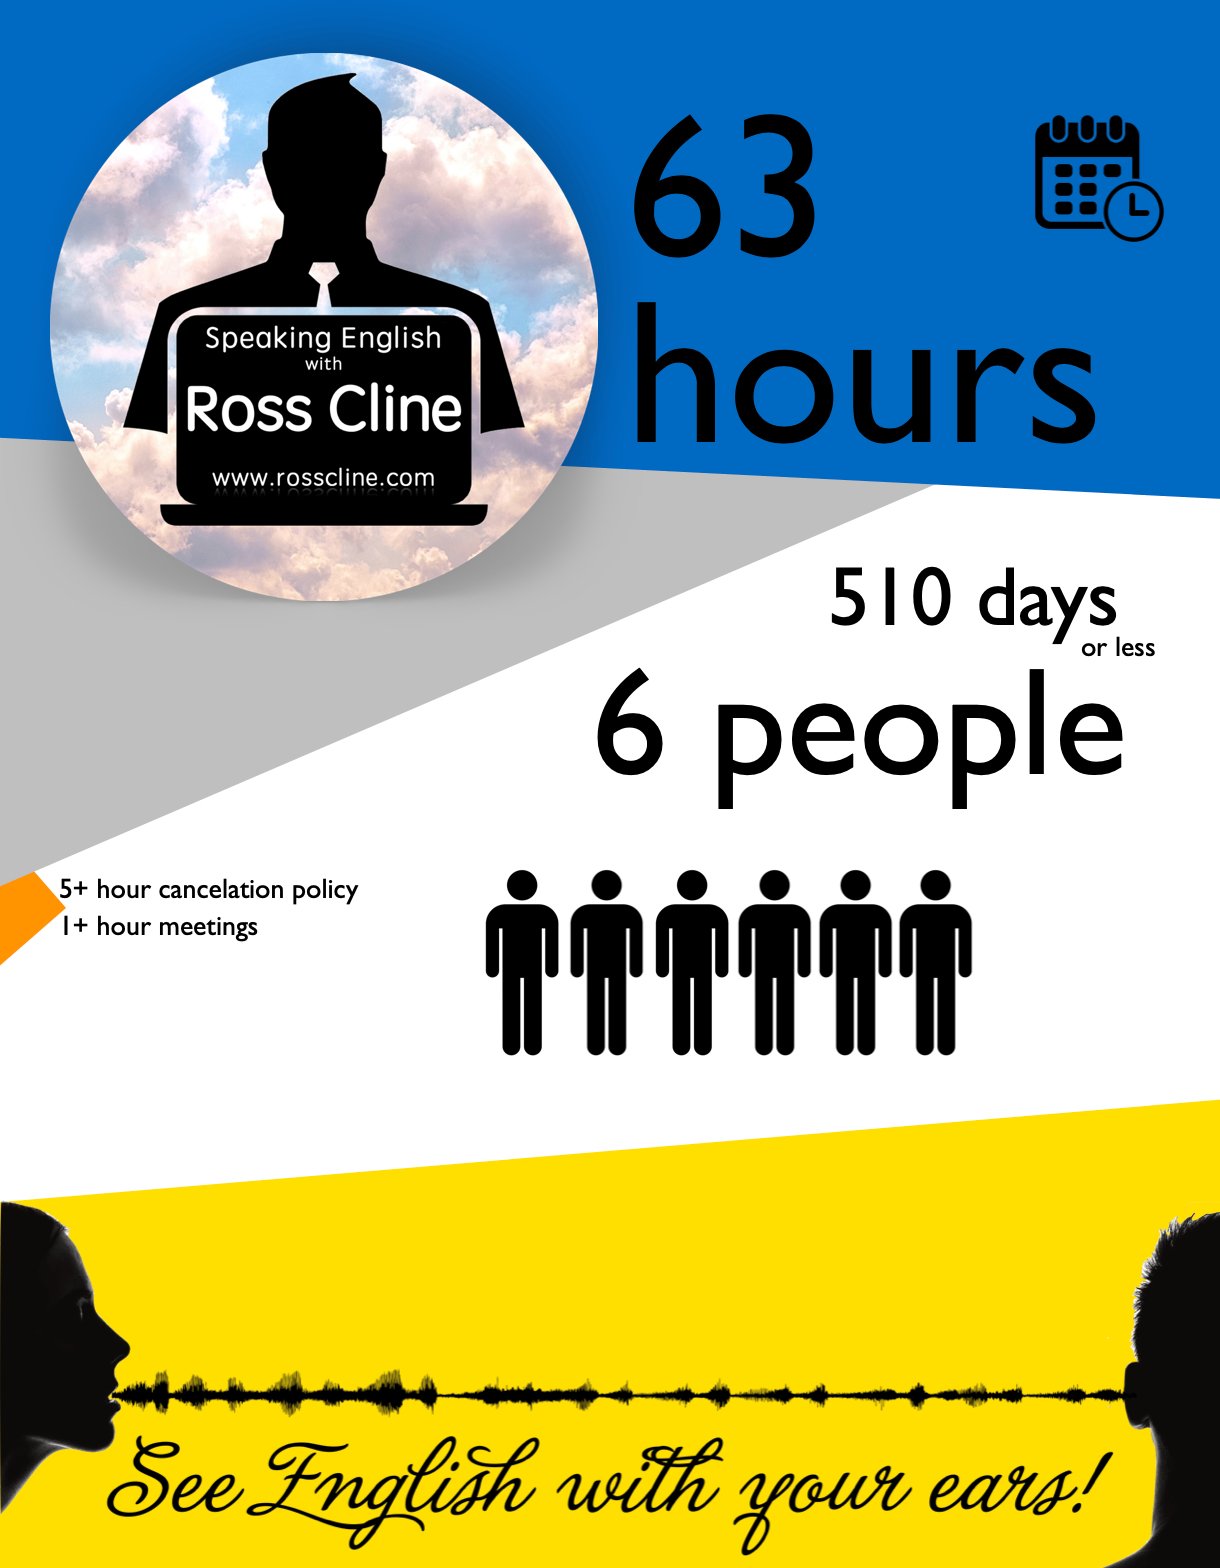 B.) 63 hours of Online Time for 6 people - www.rosscline.com